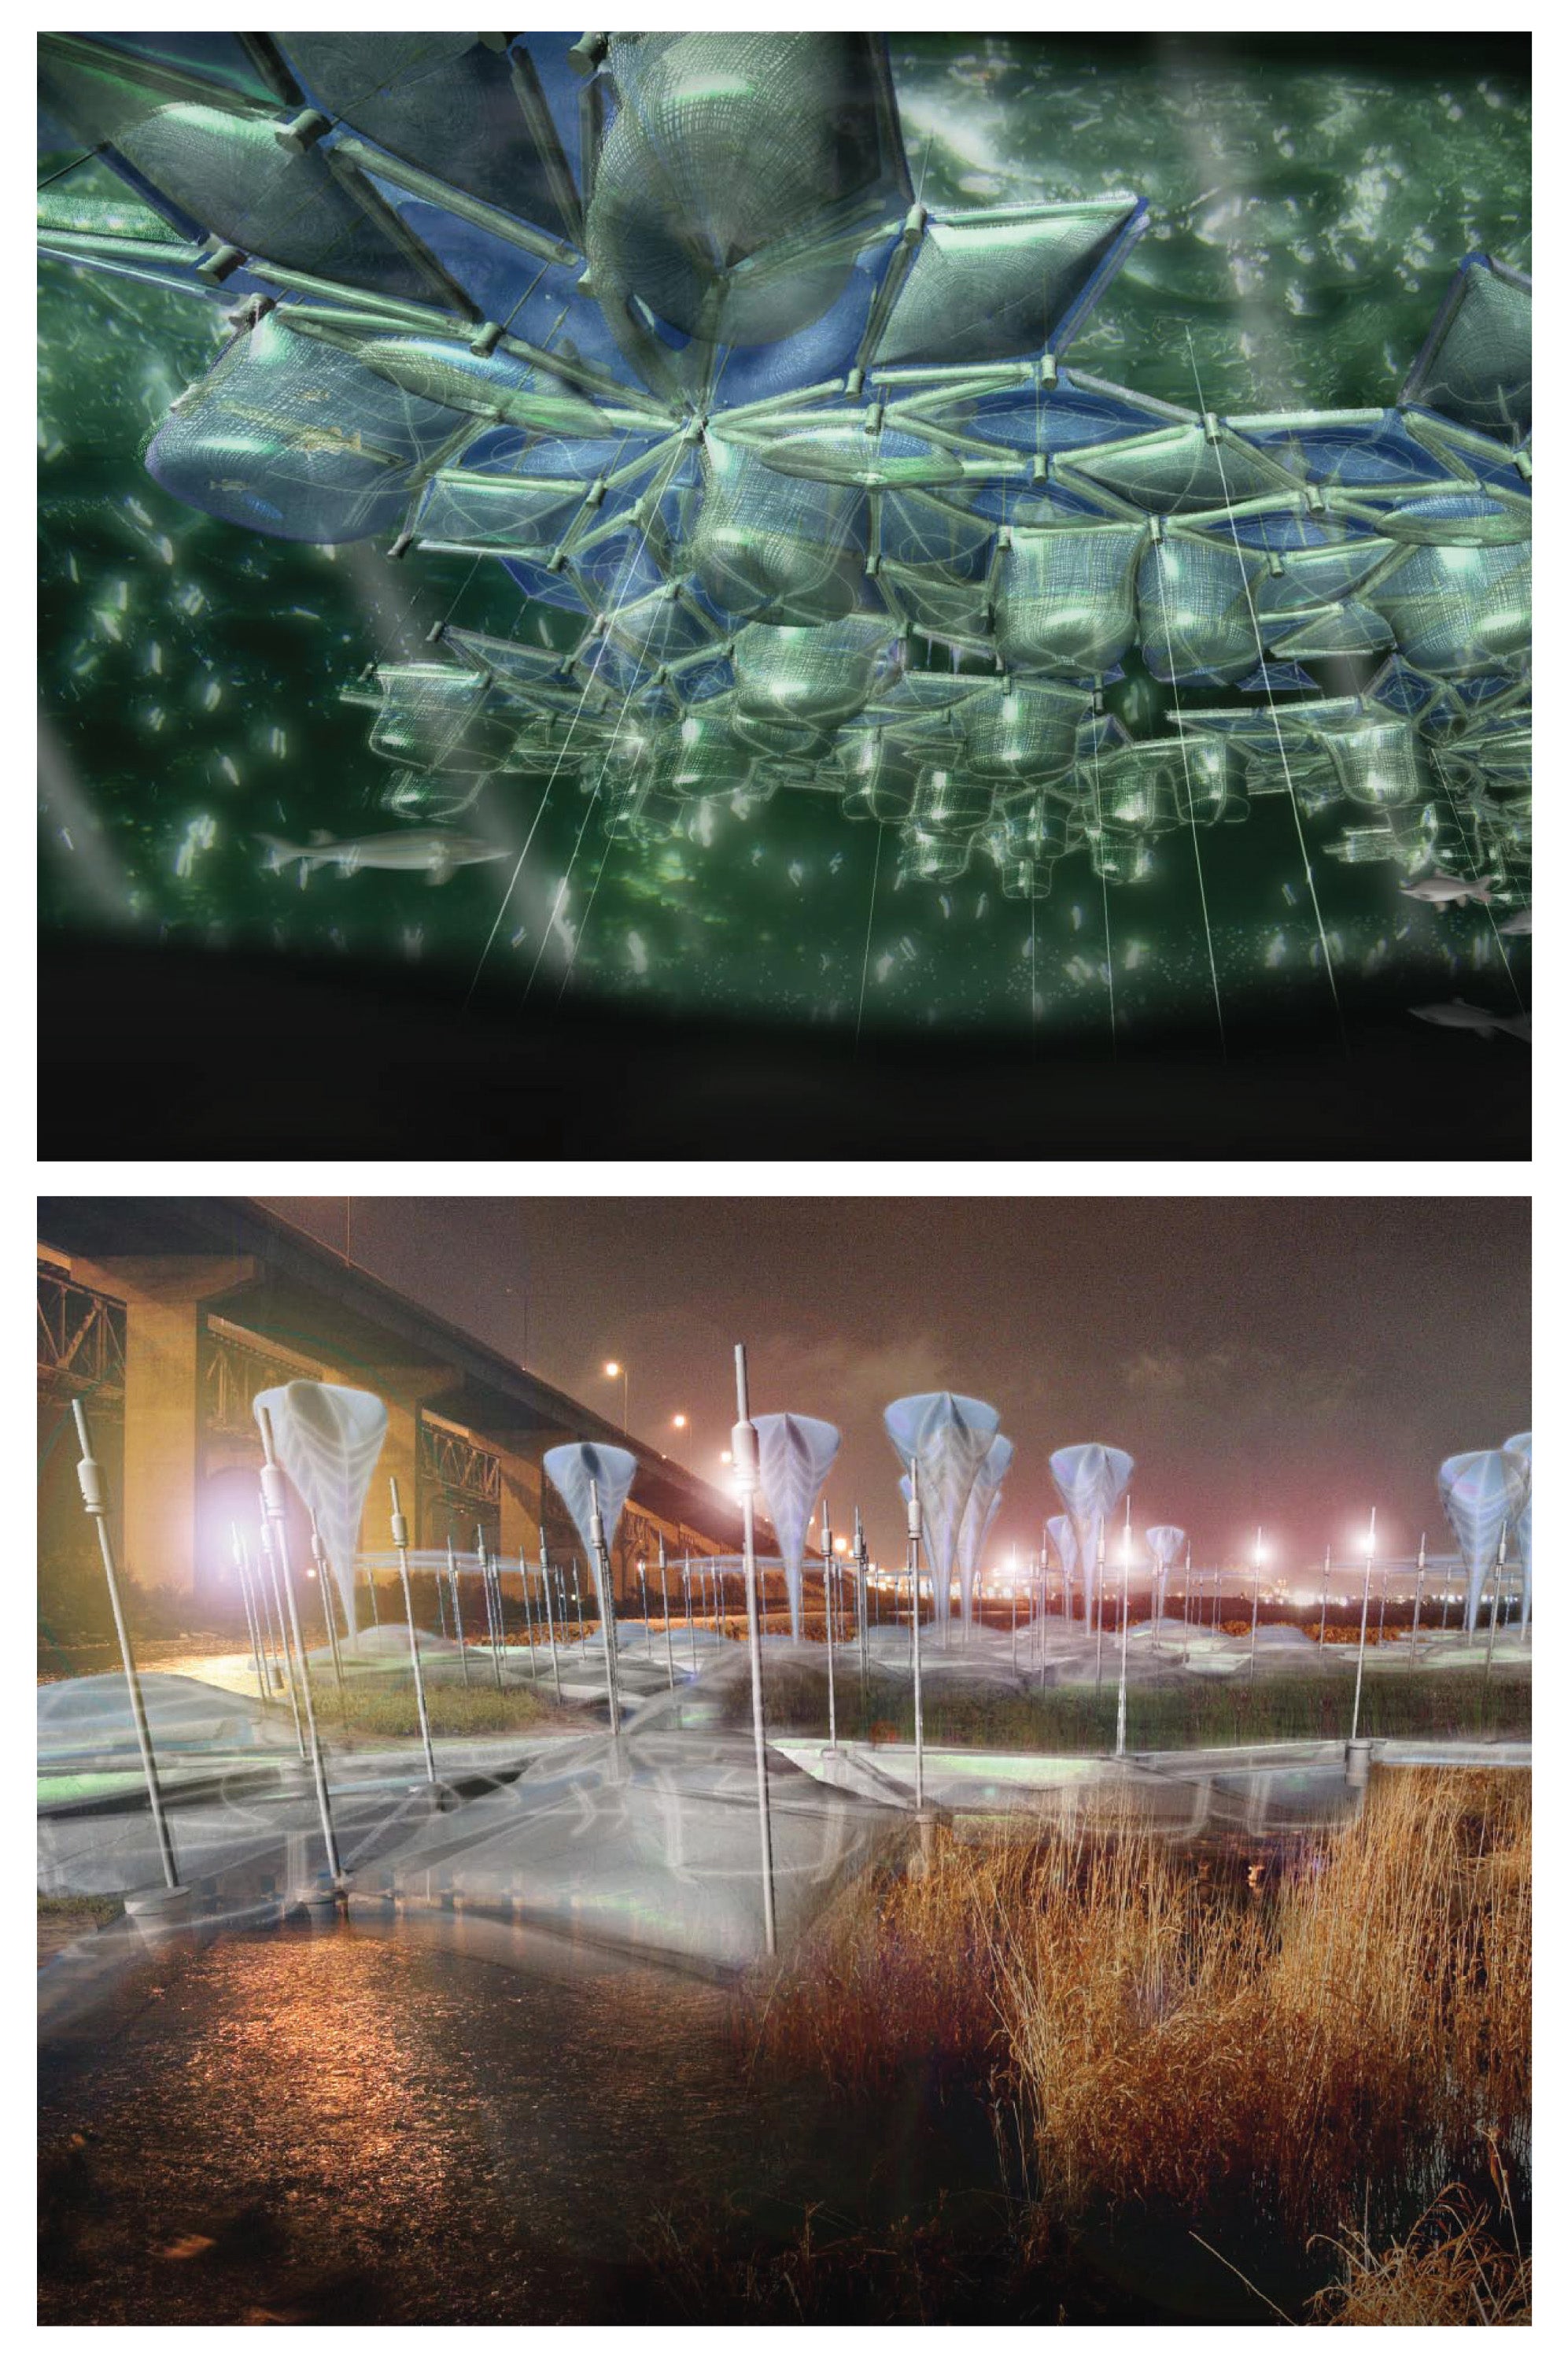 Two exterior night time renderings of this site installation art piece design. The design is made of many flower shaped objects.